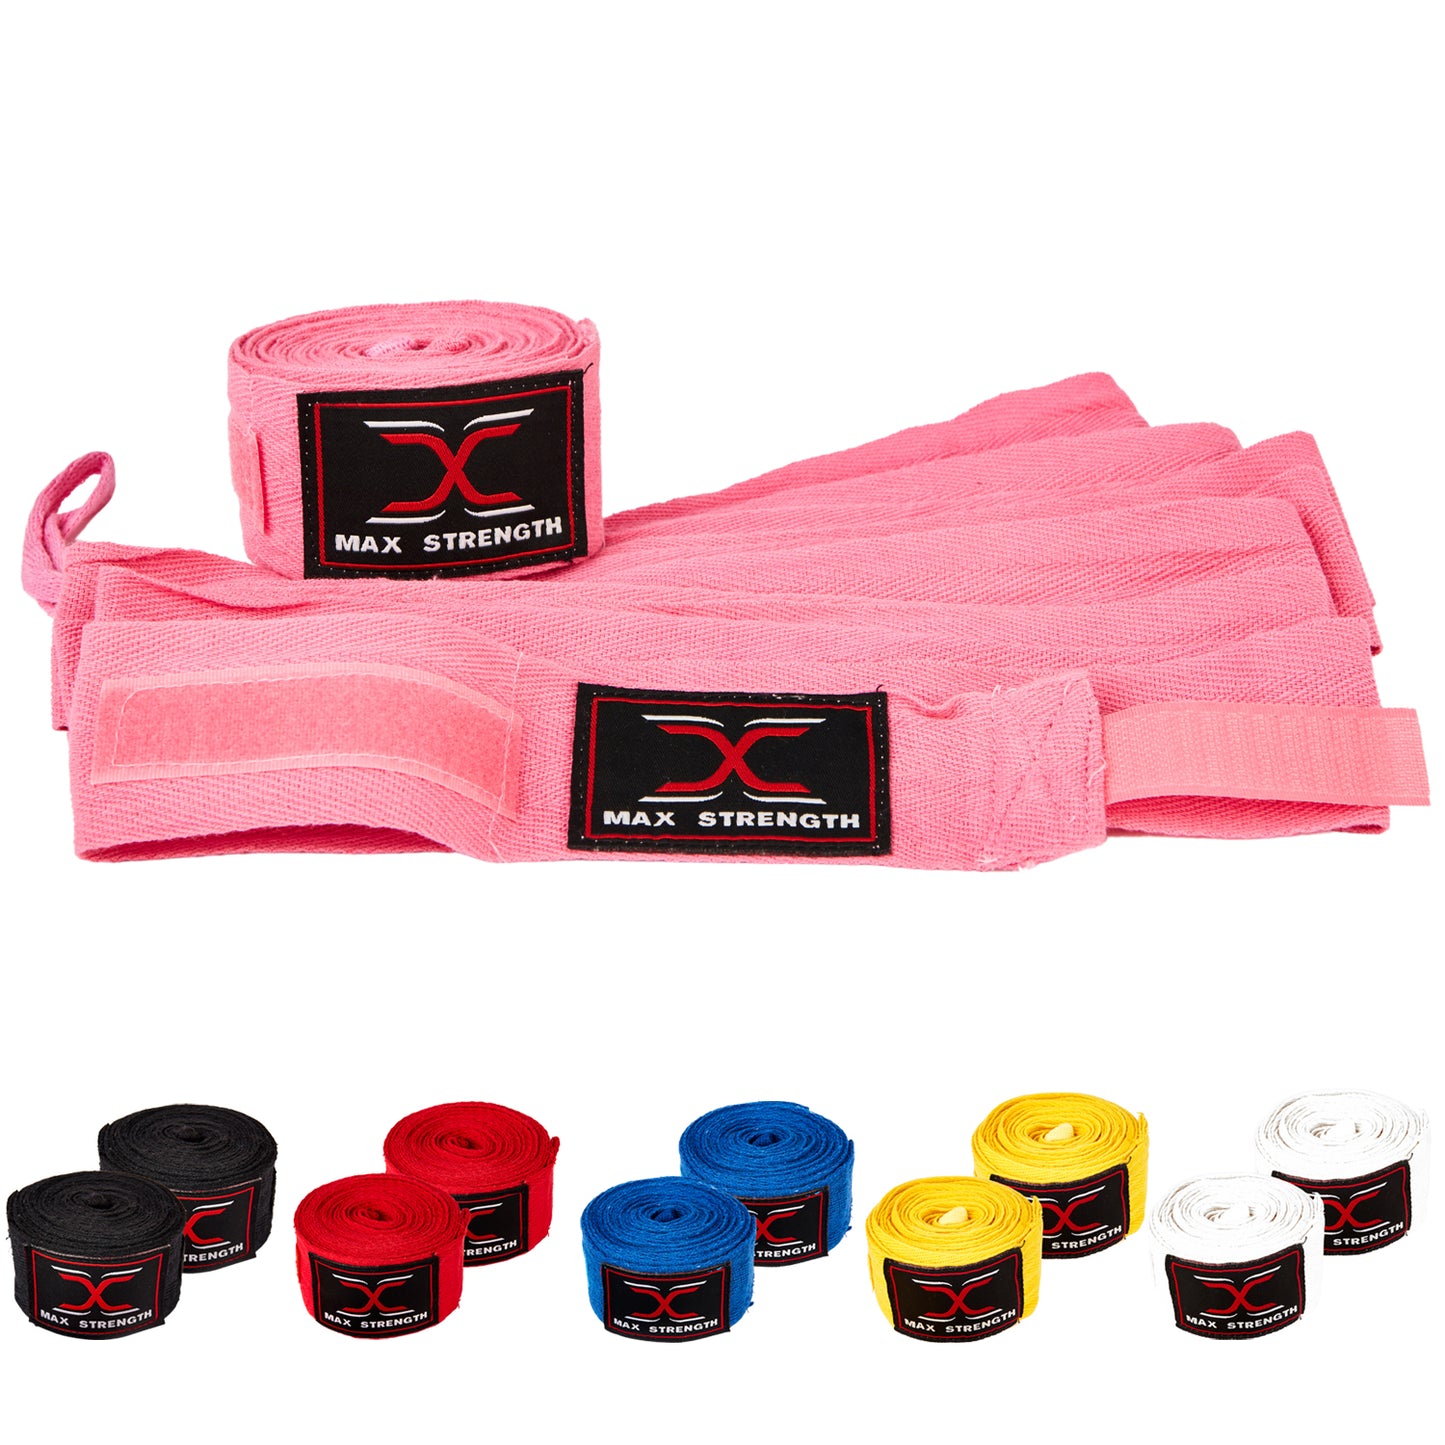 Pink boxing hand wraps